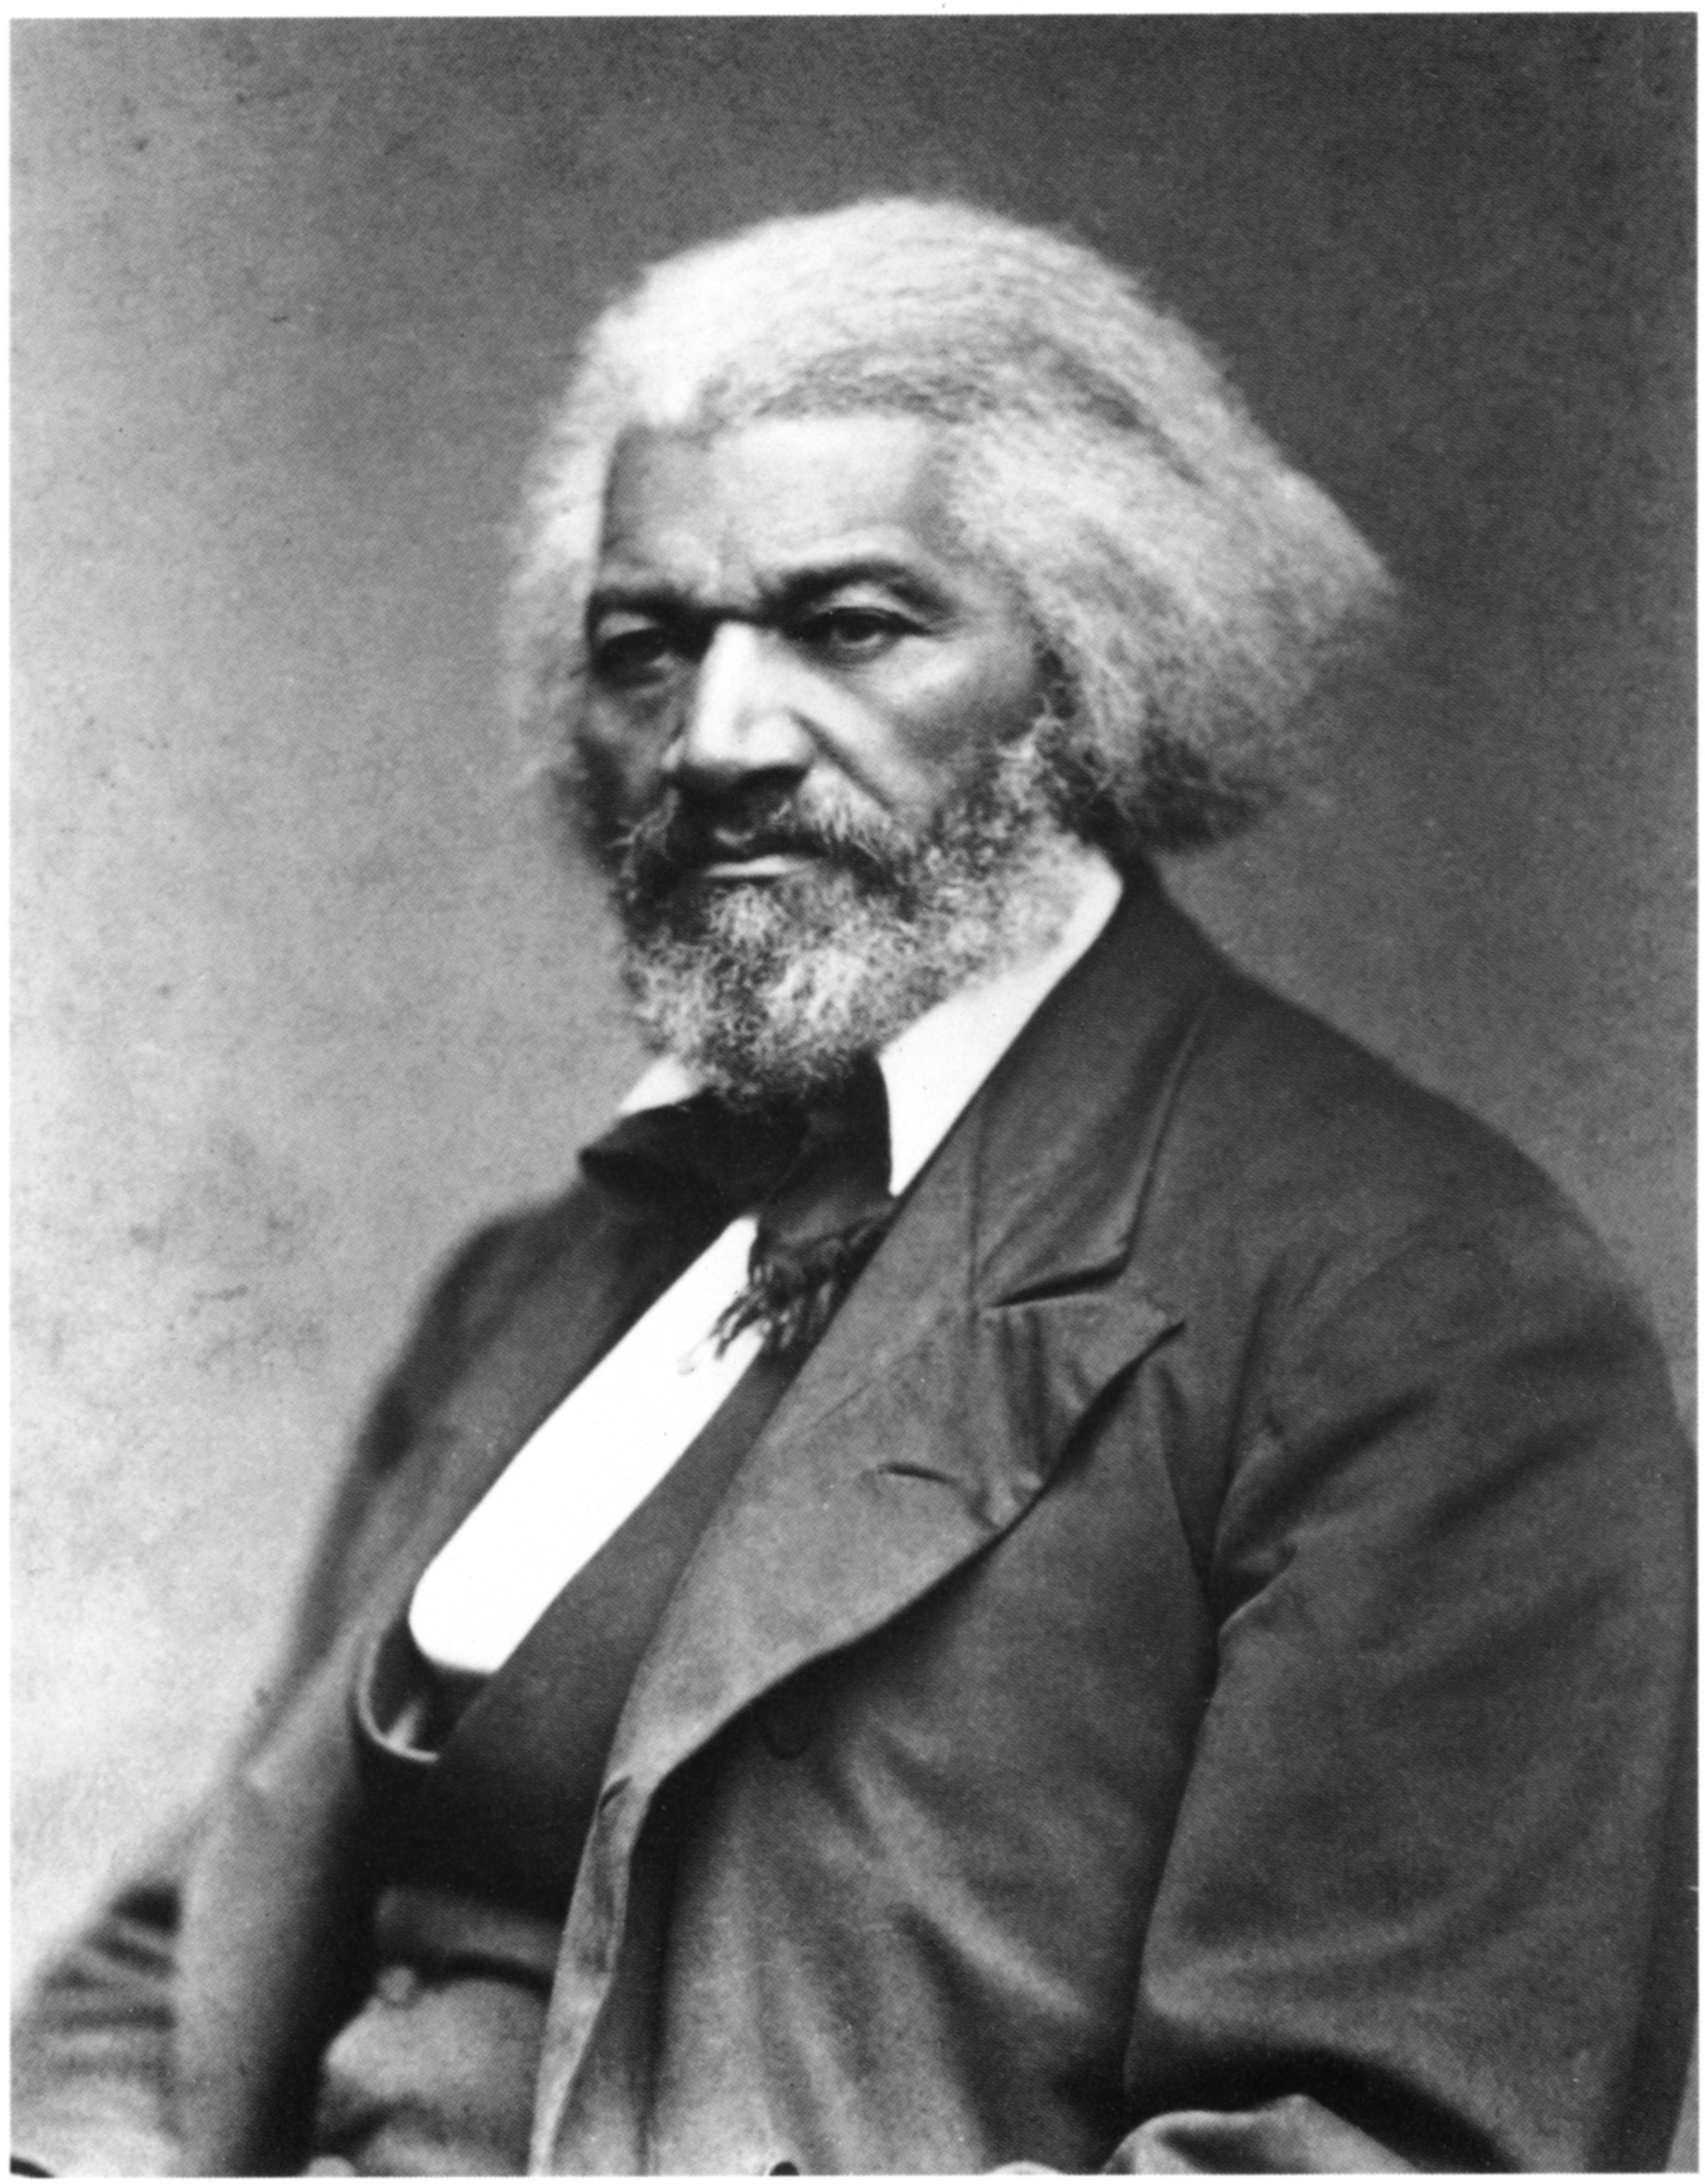 Frederick Douglass escaped slavery as a young man and became a leader in the abolitionist cause. (Photo: JT Vintage/ZUMA Press/Newscom)